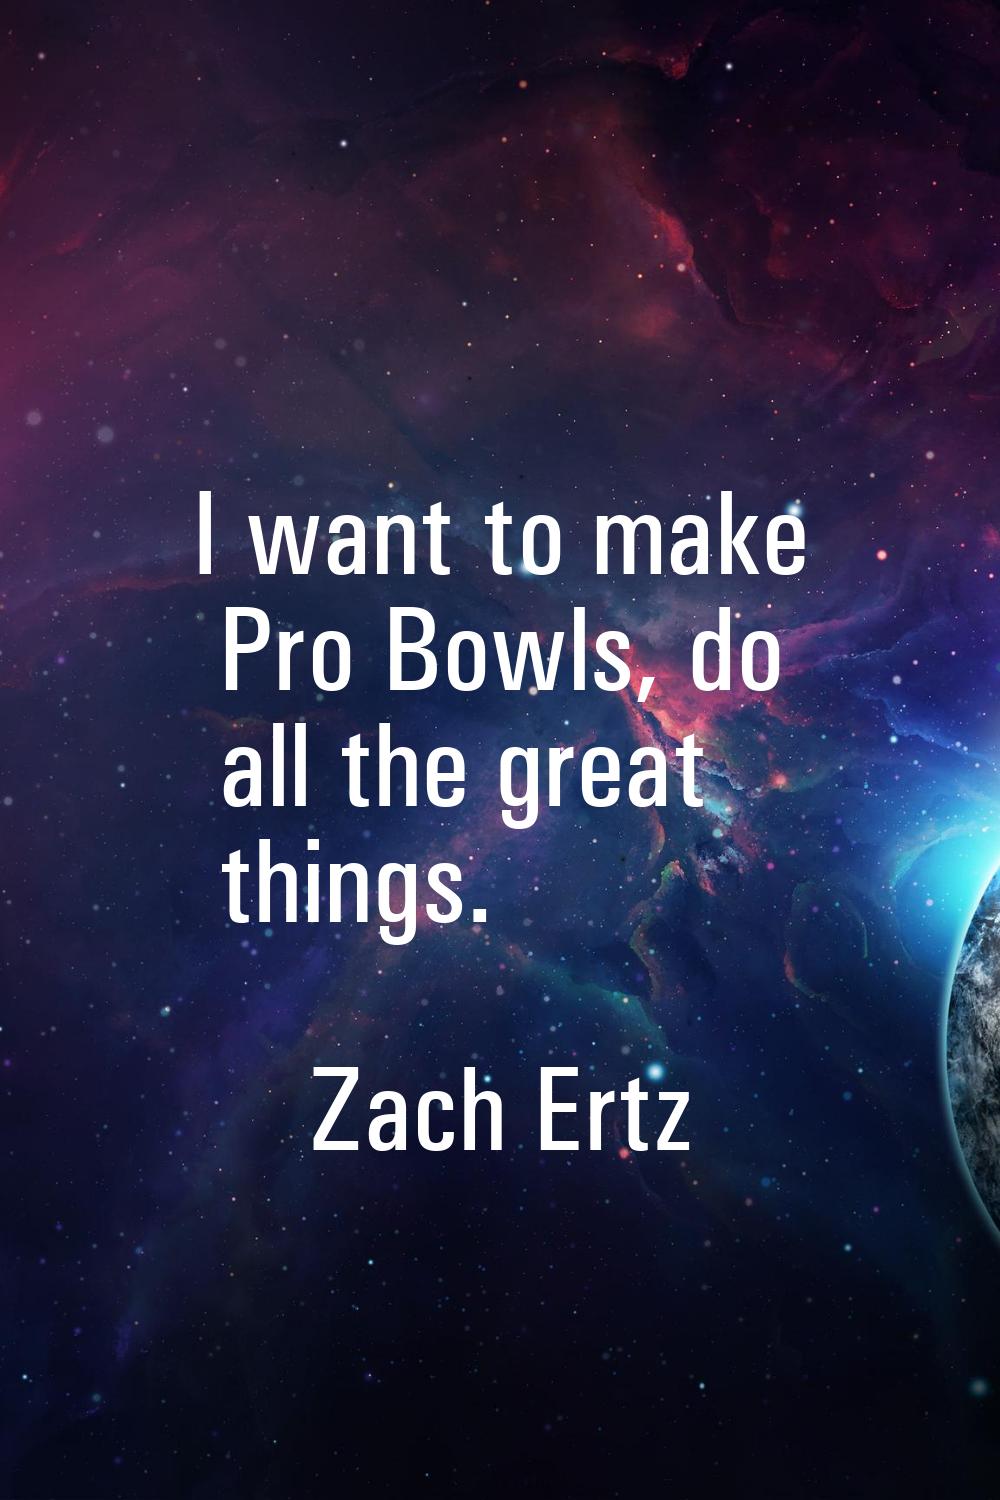 I want to make Pro Bowls, do all the great things.